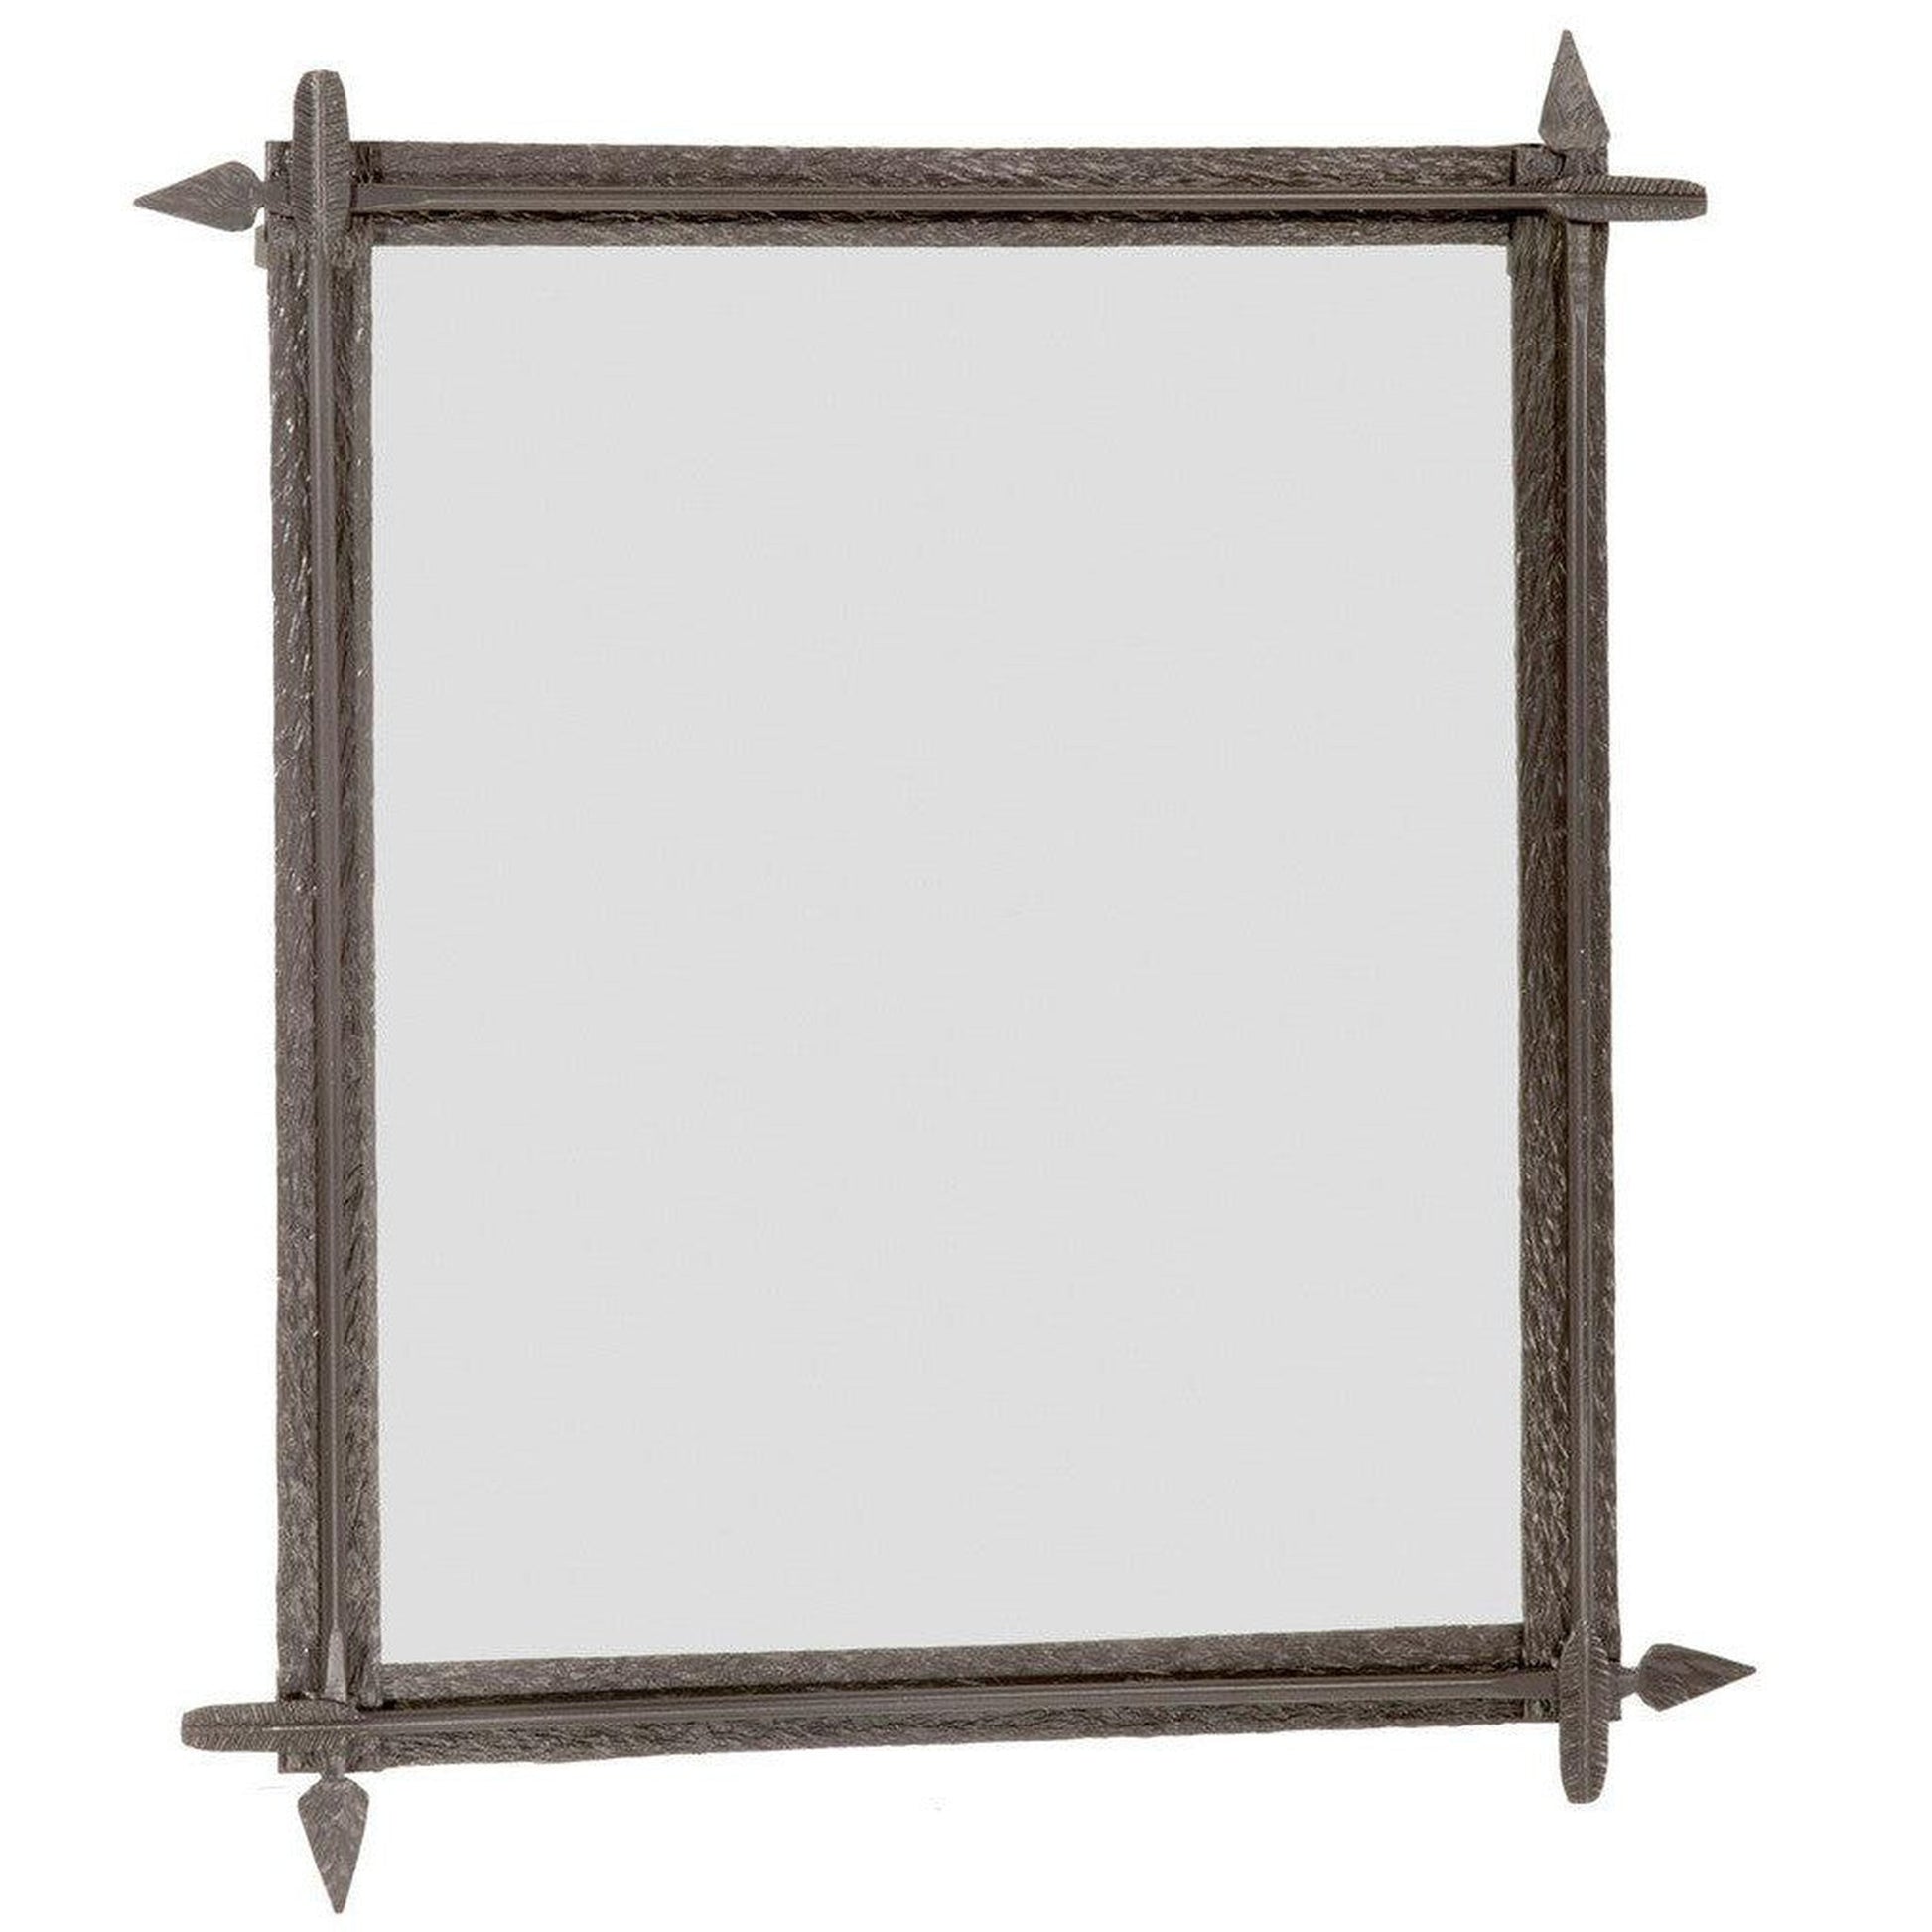 Stone County Ironworks Quapaw 31" x 43" Large Satin Black Iron Wall Mirror With Pewter Iron Accent